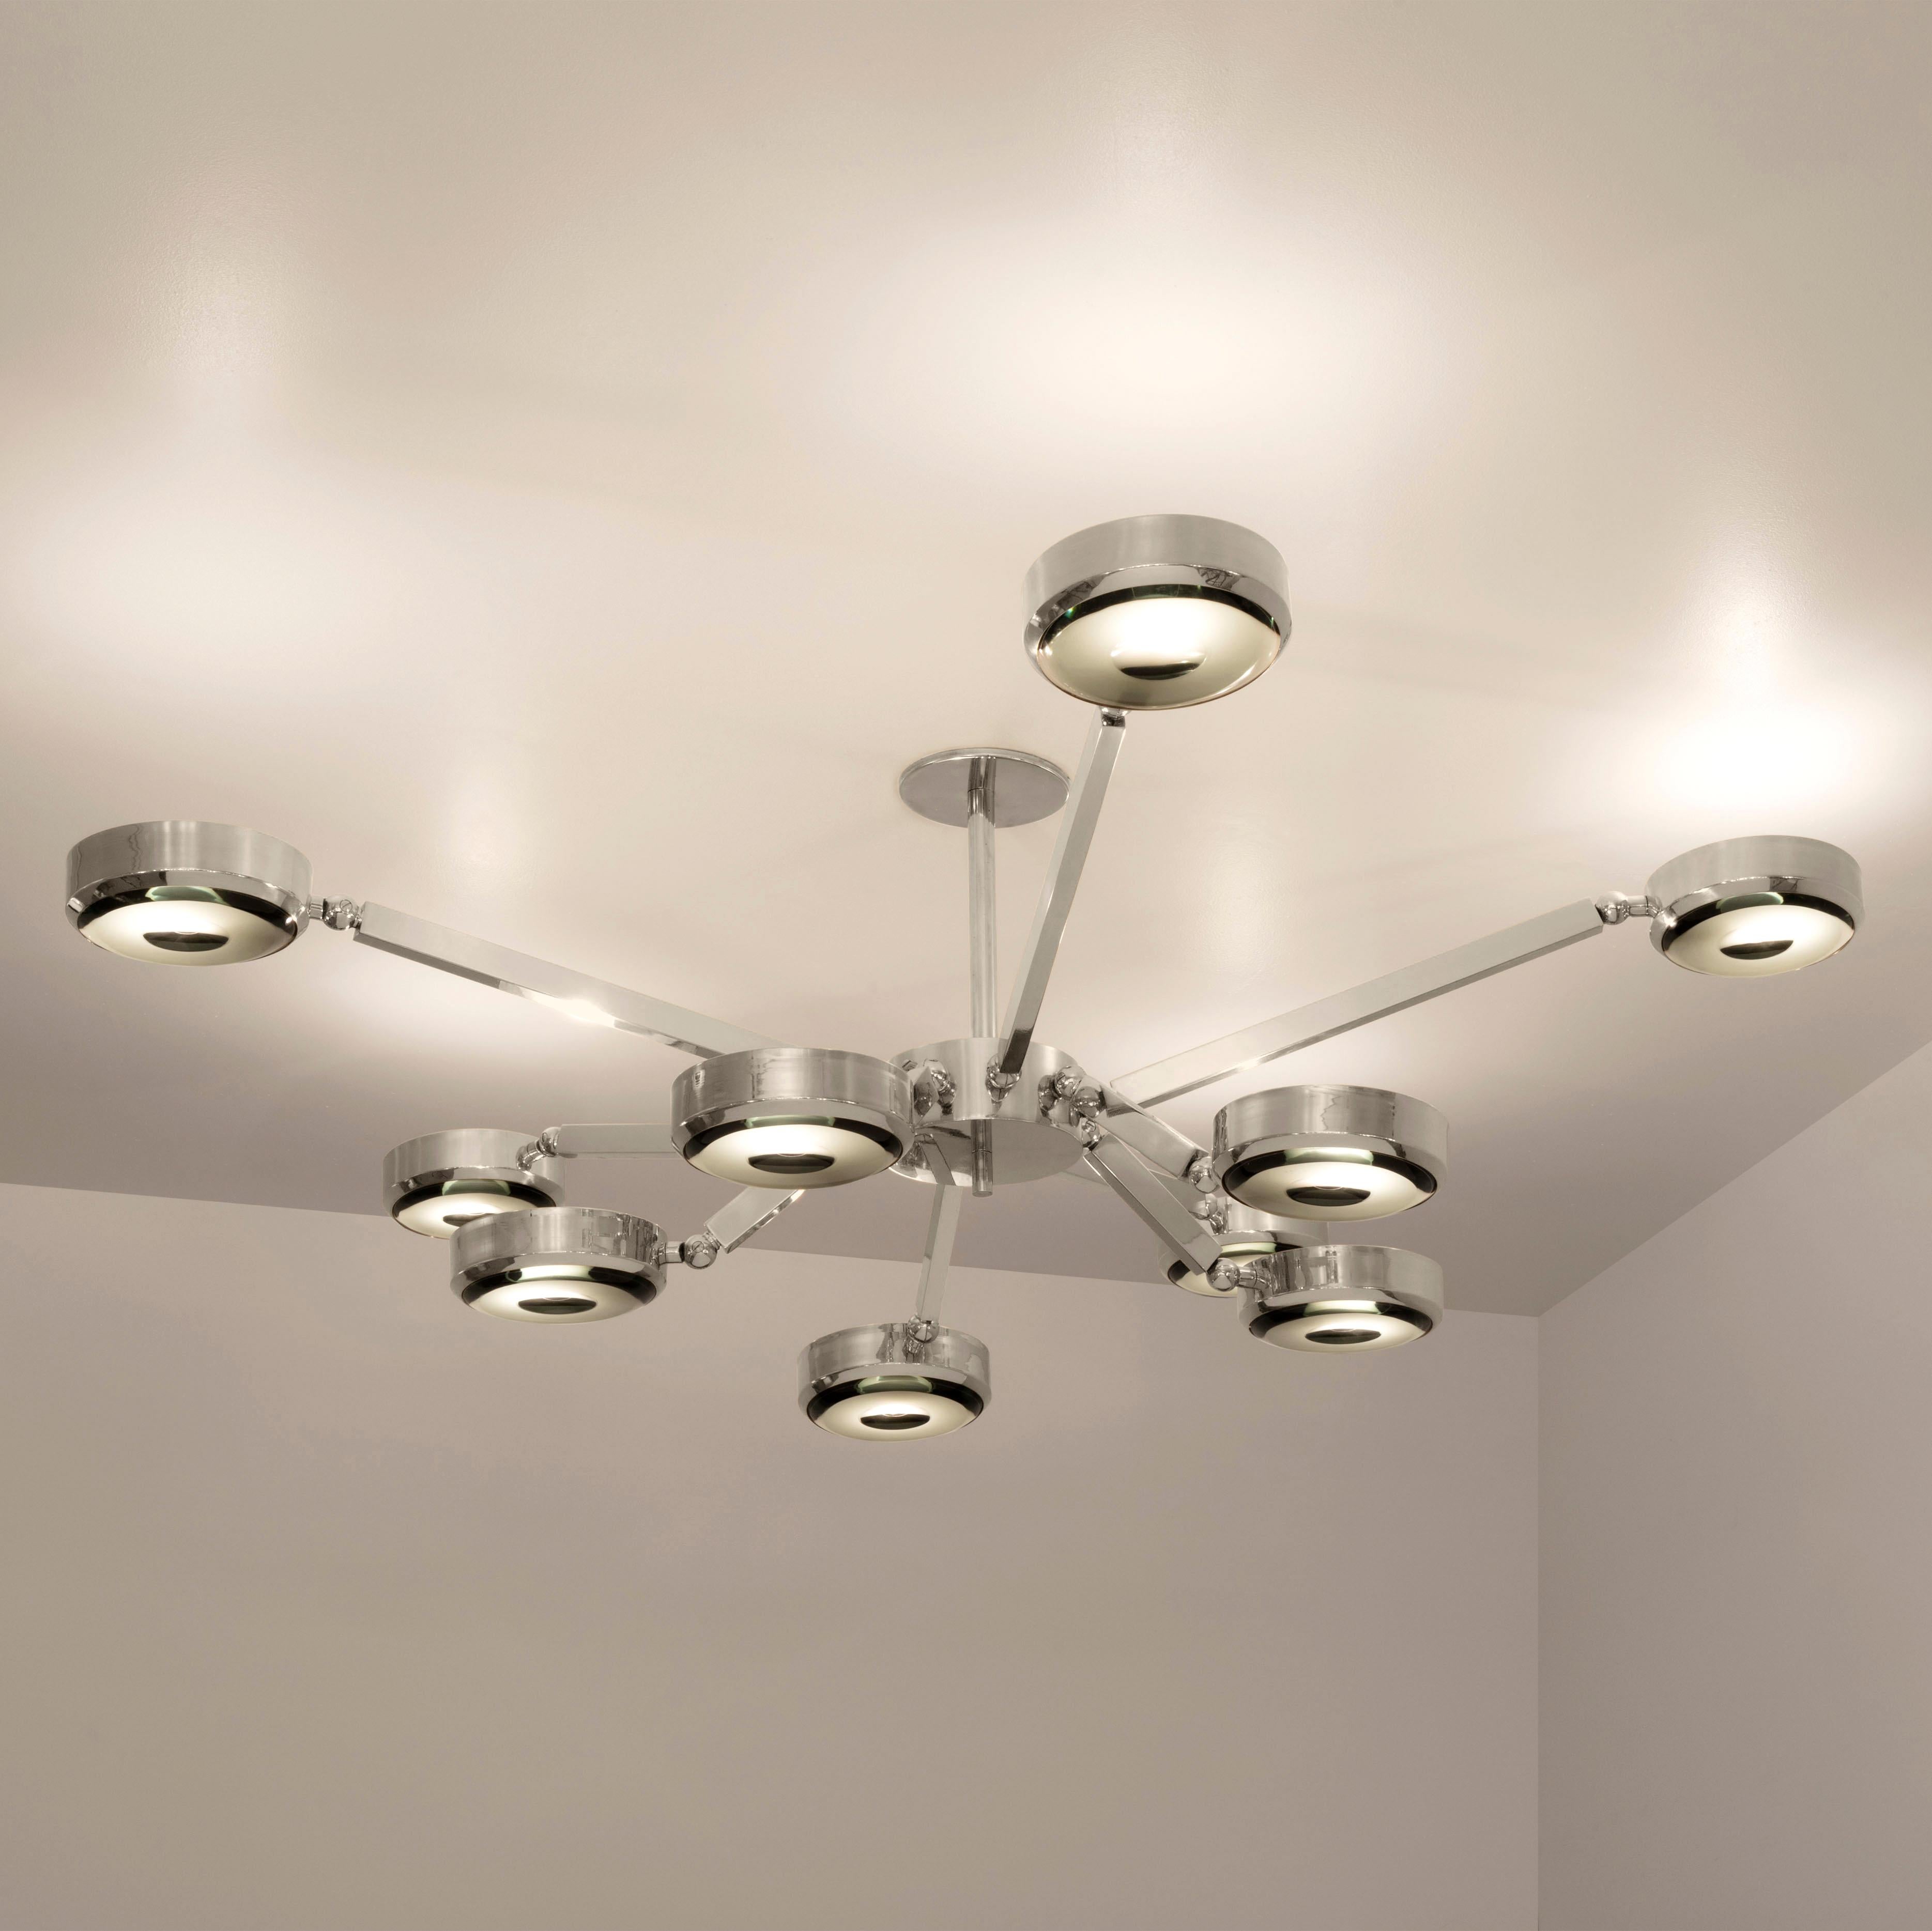 The Oculus ceiling light features an innovative articulating design that allows the ten arms to have a wide range of motion for endless configurations. The brass constructed frame can be flush mounted or installed on a stem and is fitted with our